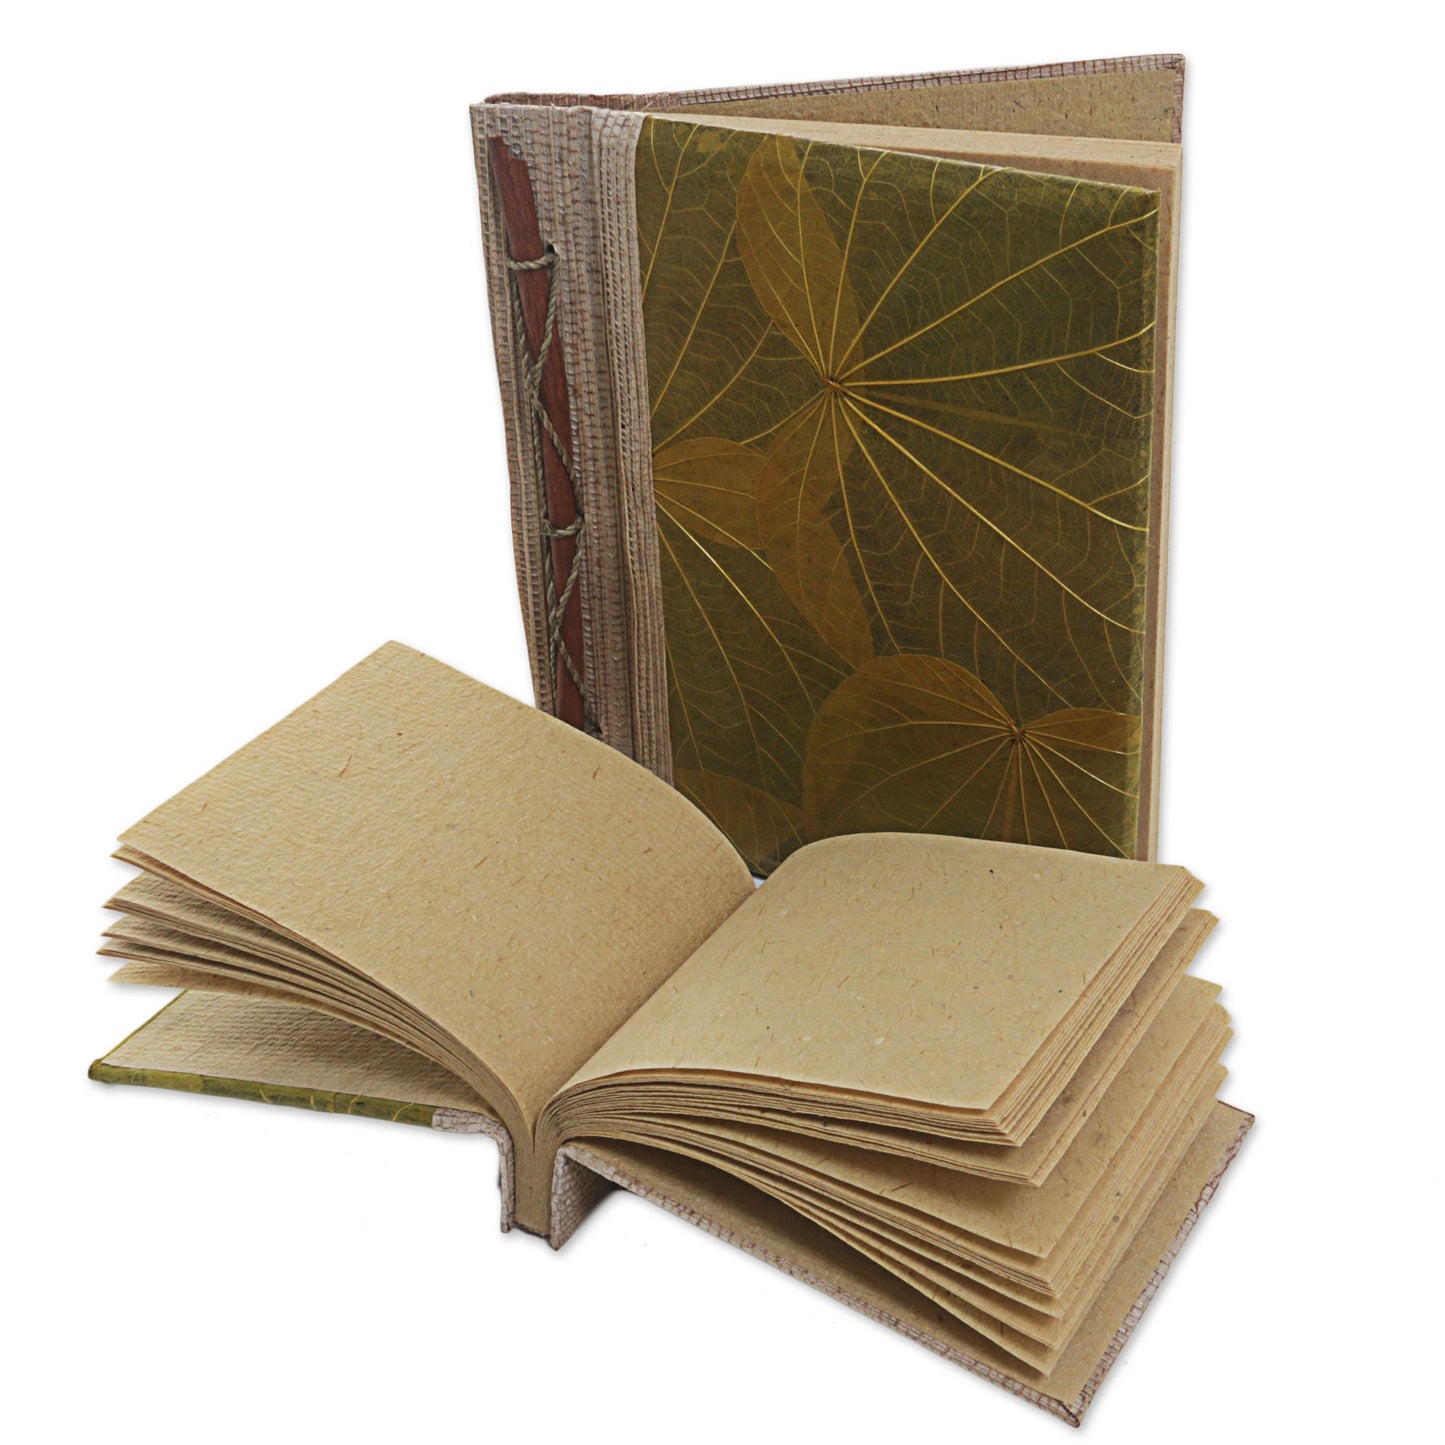 Autumn Spirit in Olive Handcrafted Pair of Rice Paper Notebooks from Indonesia